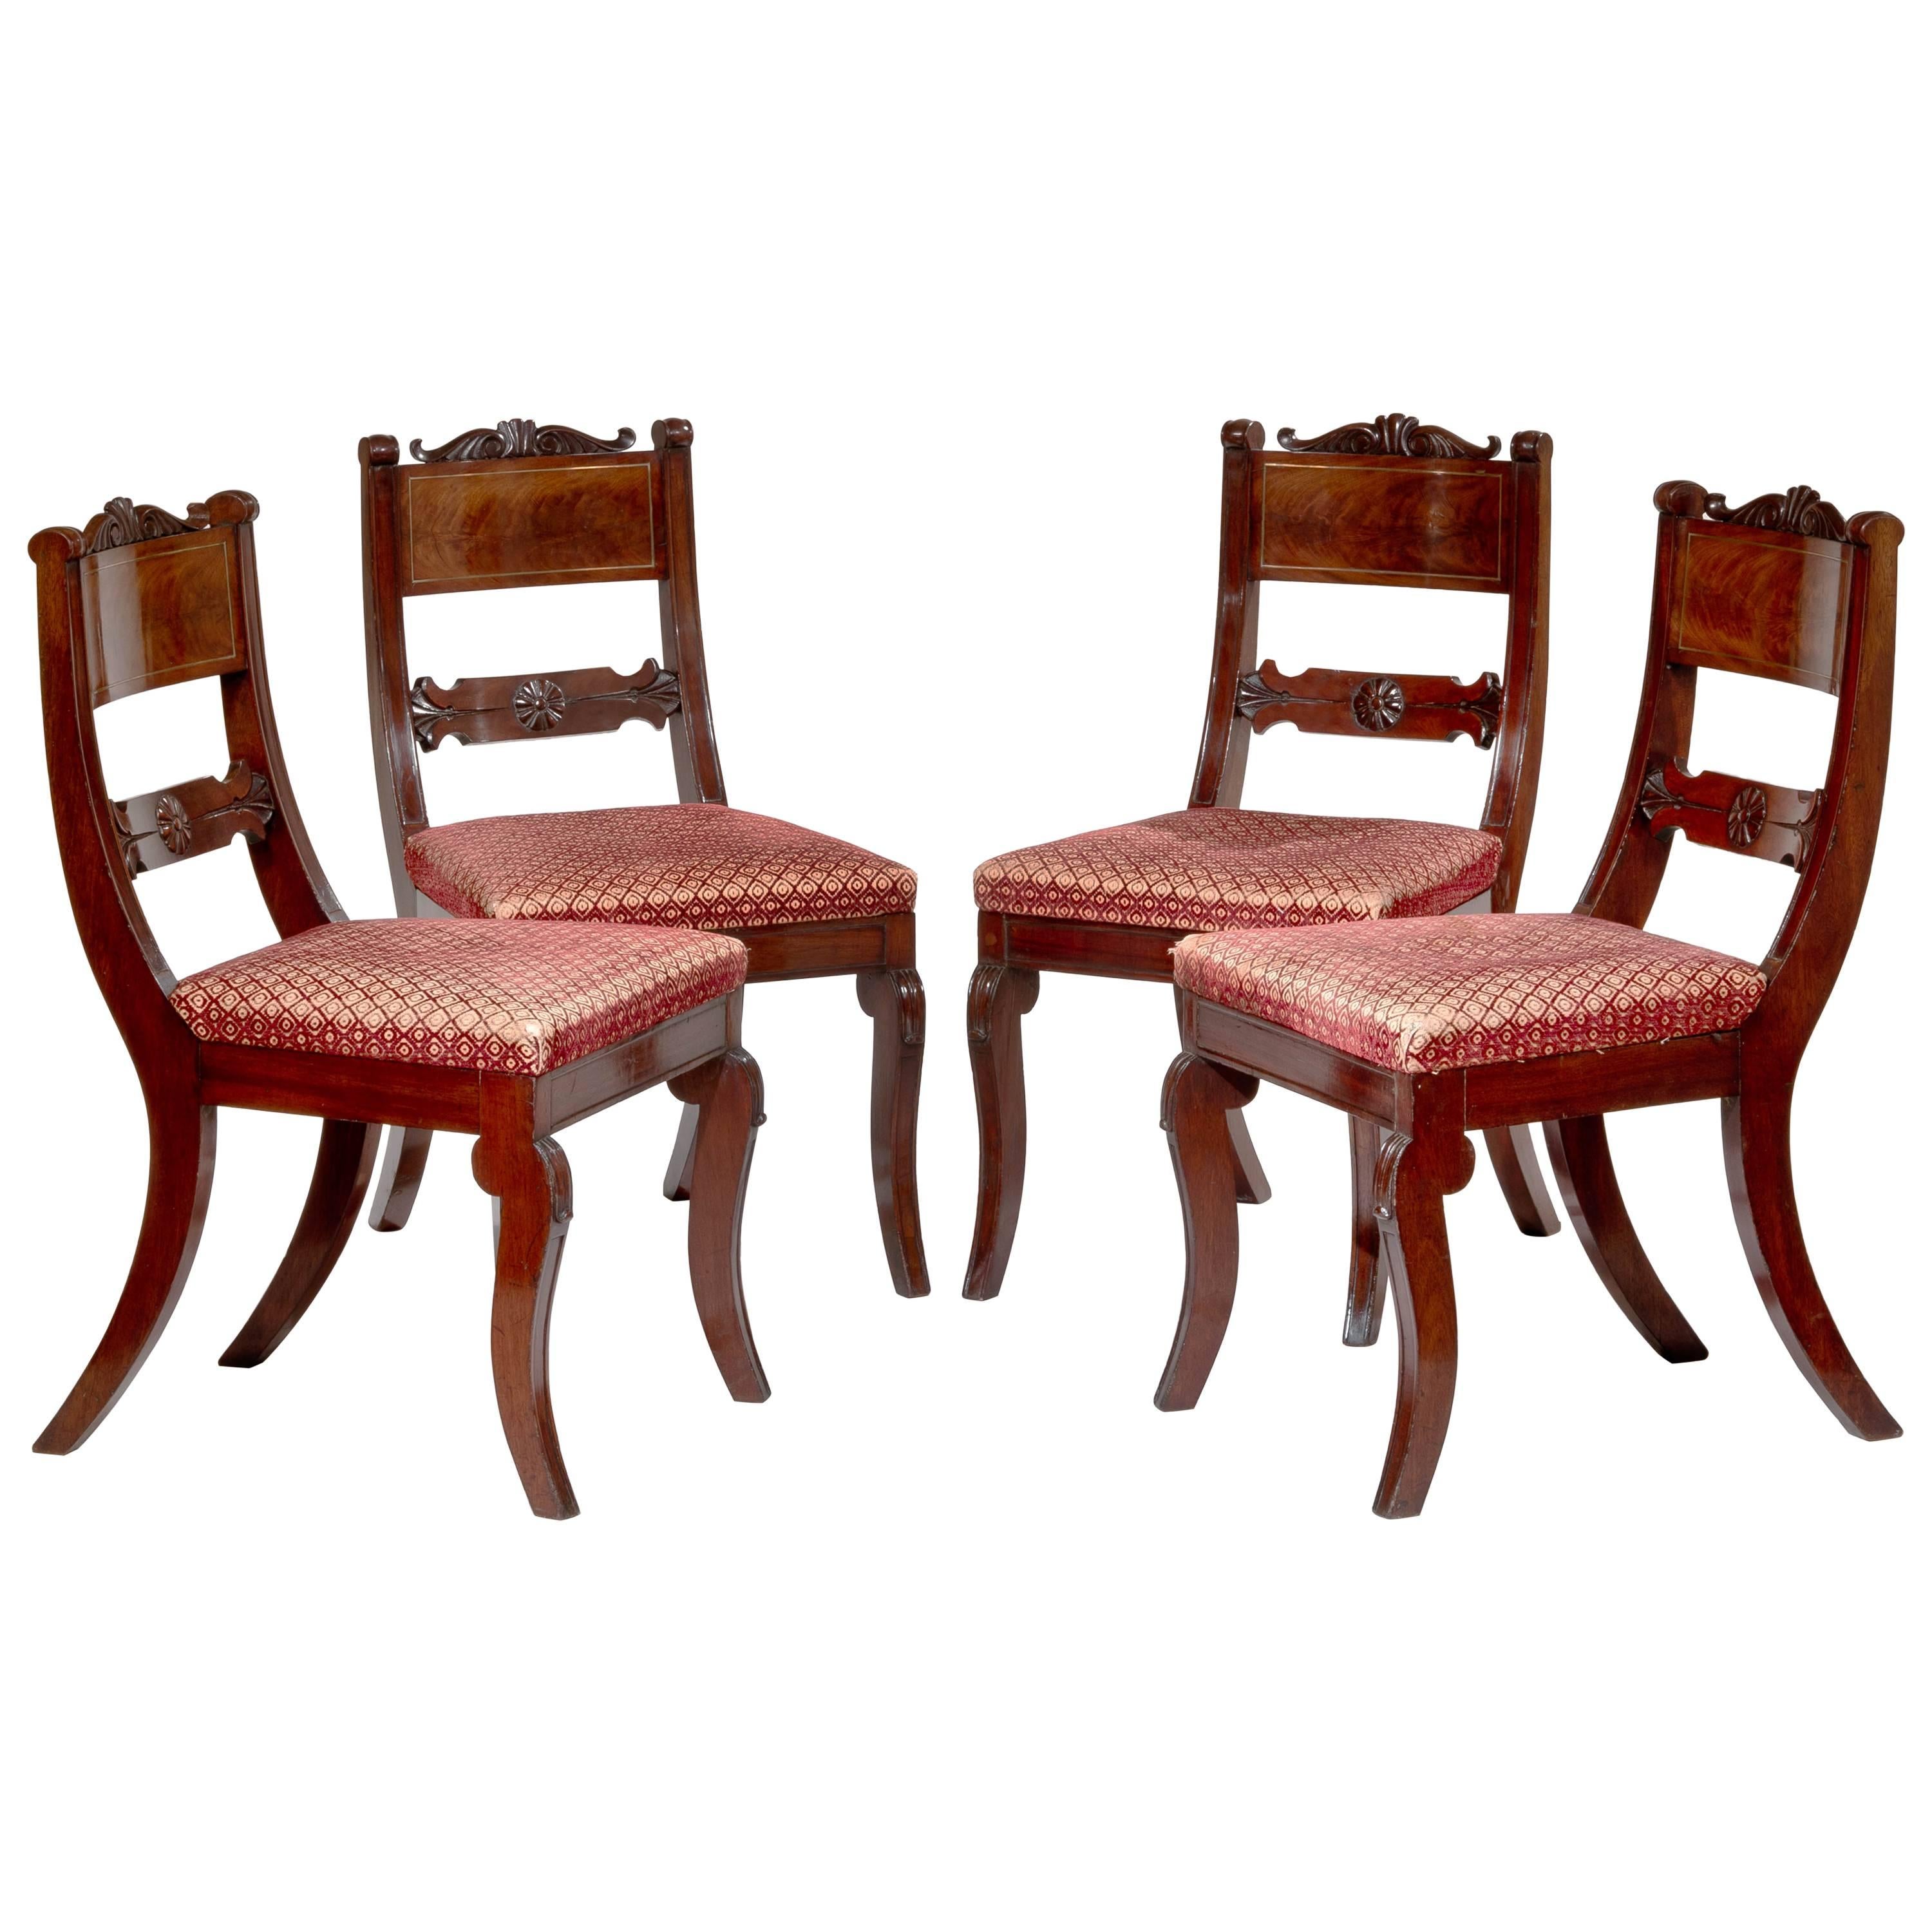 Set of Four Brass-Inlaid Carved Mahogany Klismos Chairs